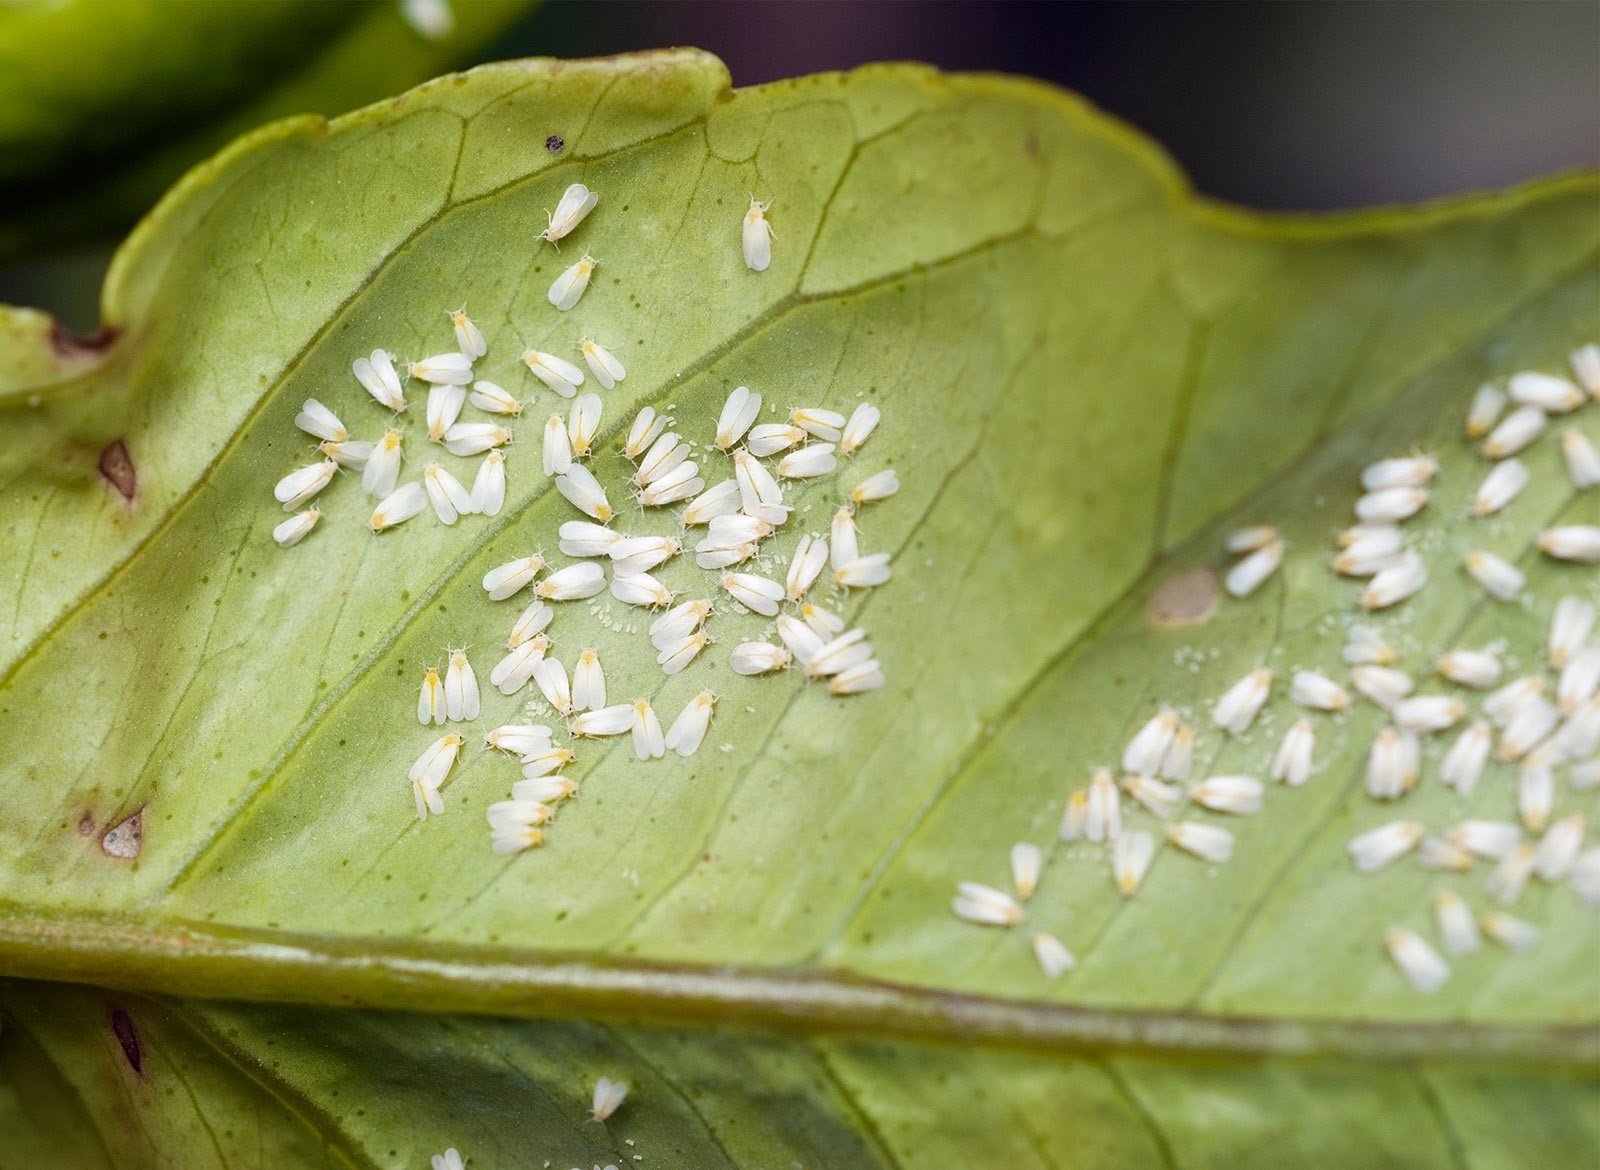 Common Indoor Plant Pests and How to Get Rid of Them